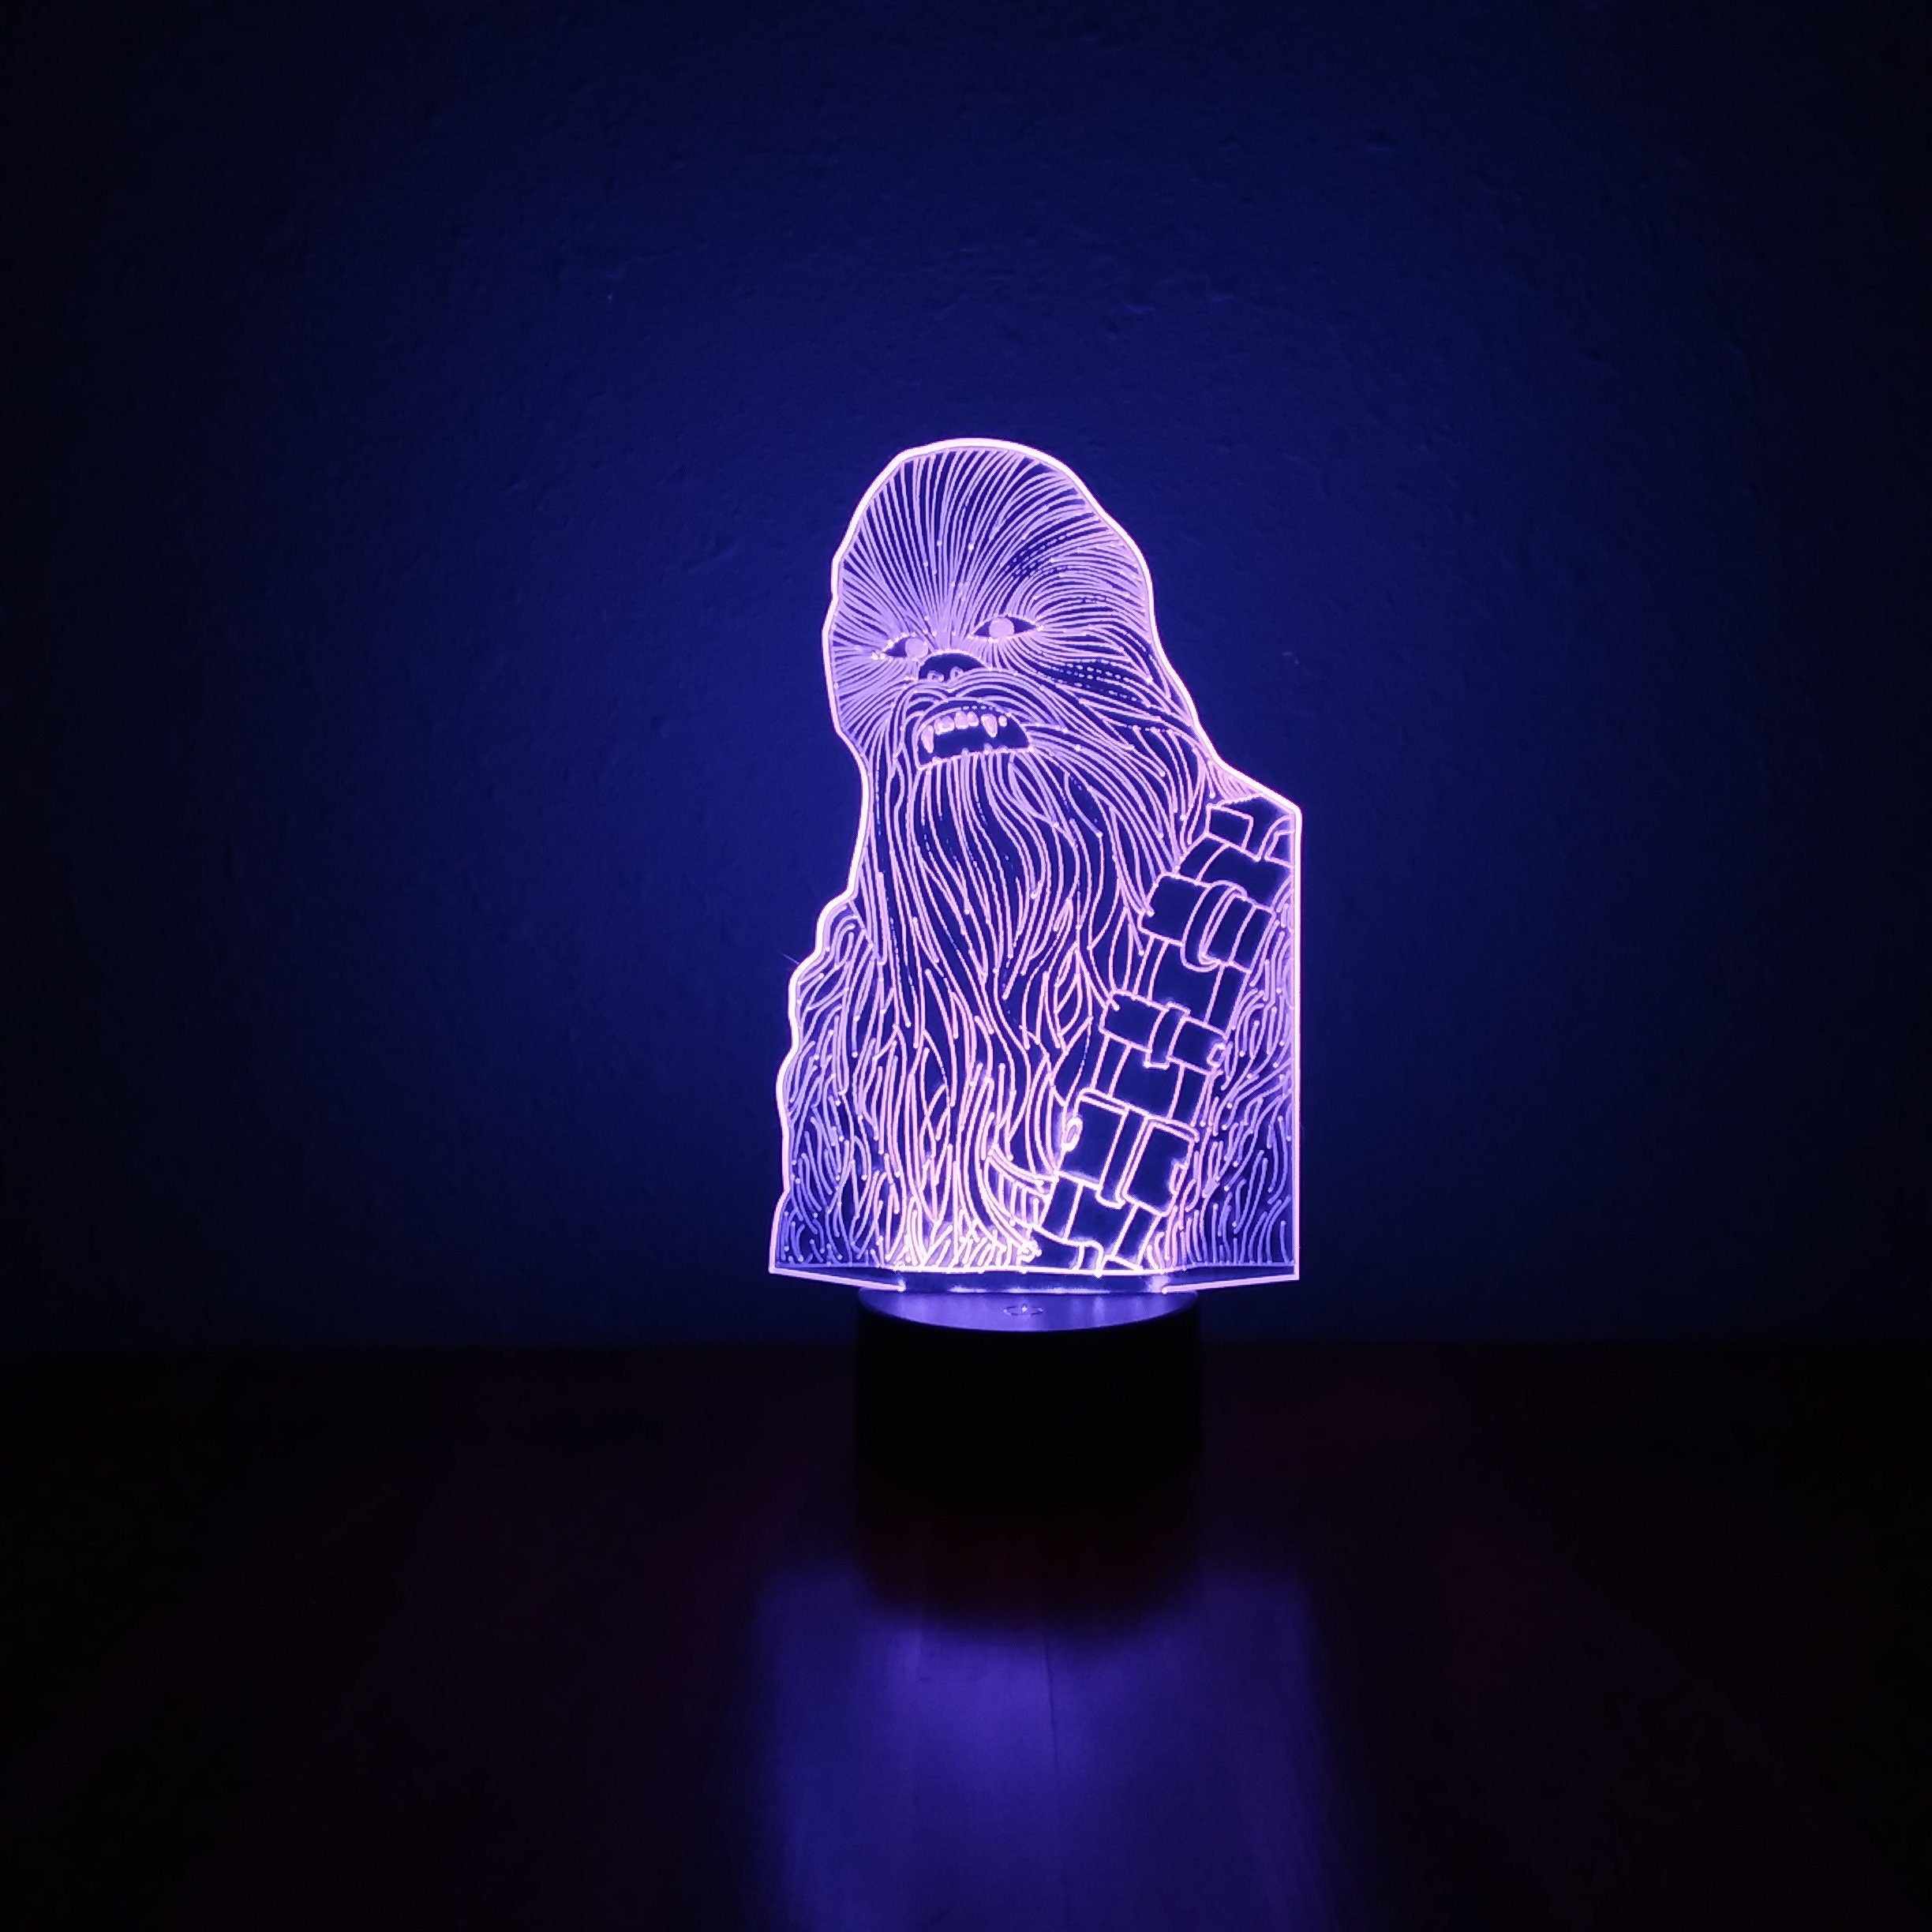 Awesome "Star Wars Chewbacca" 3D LED Lamp (1246) - FREE Shipping!